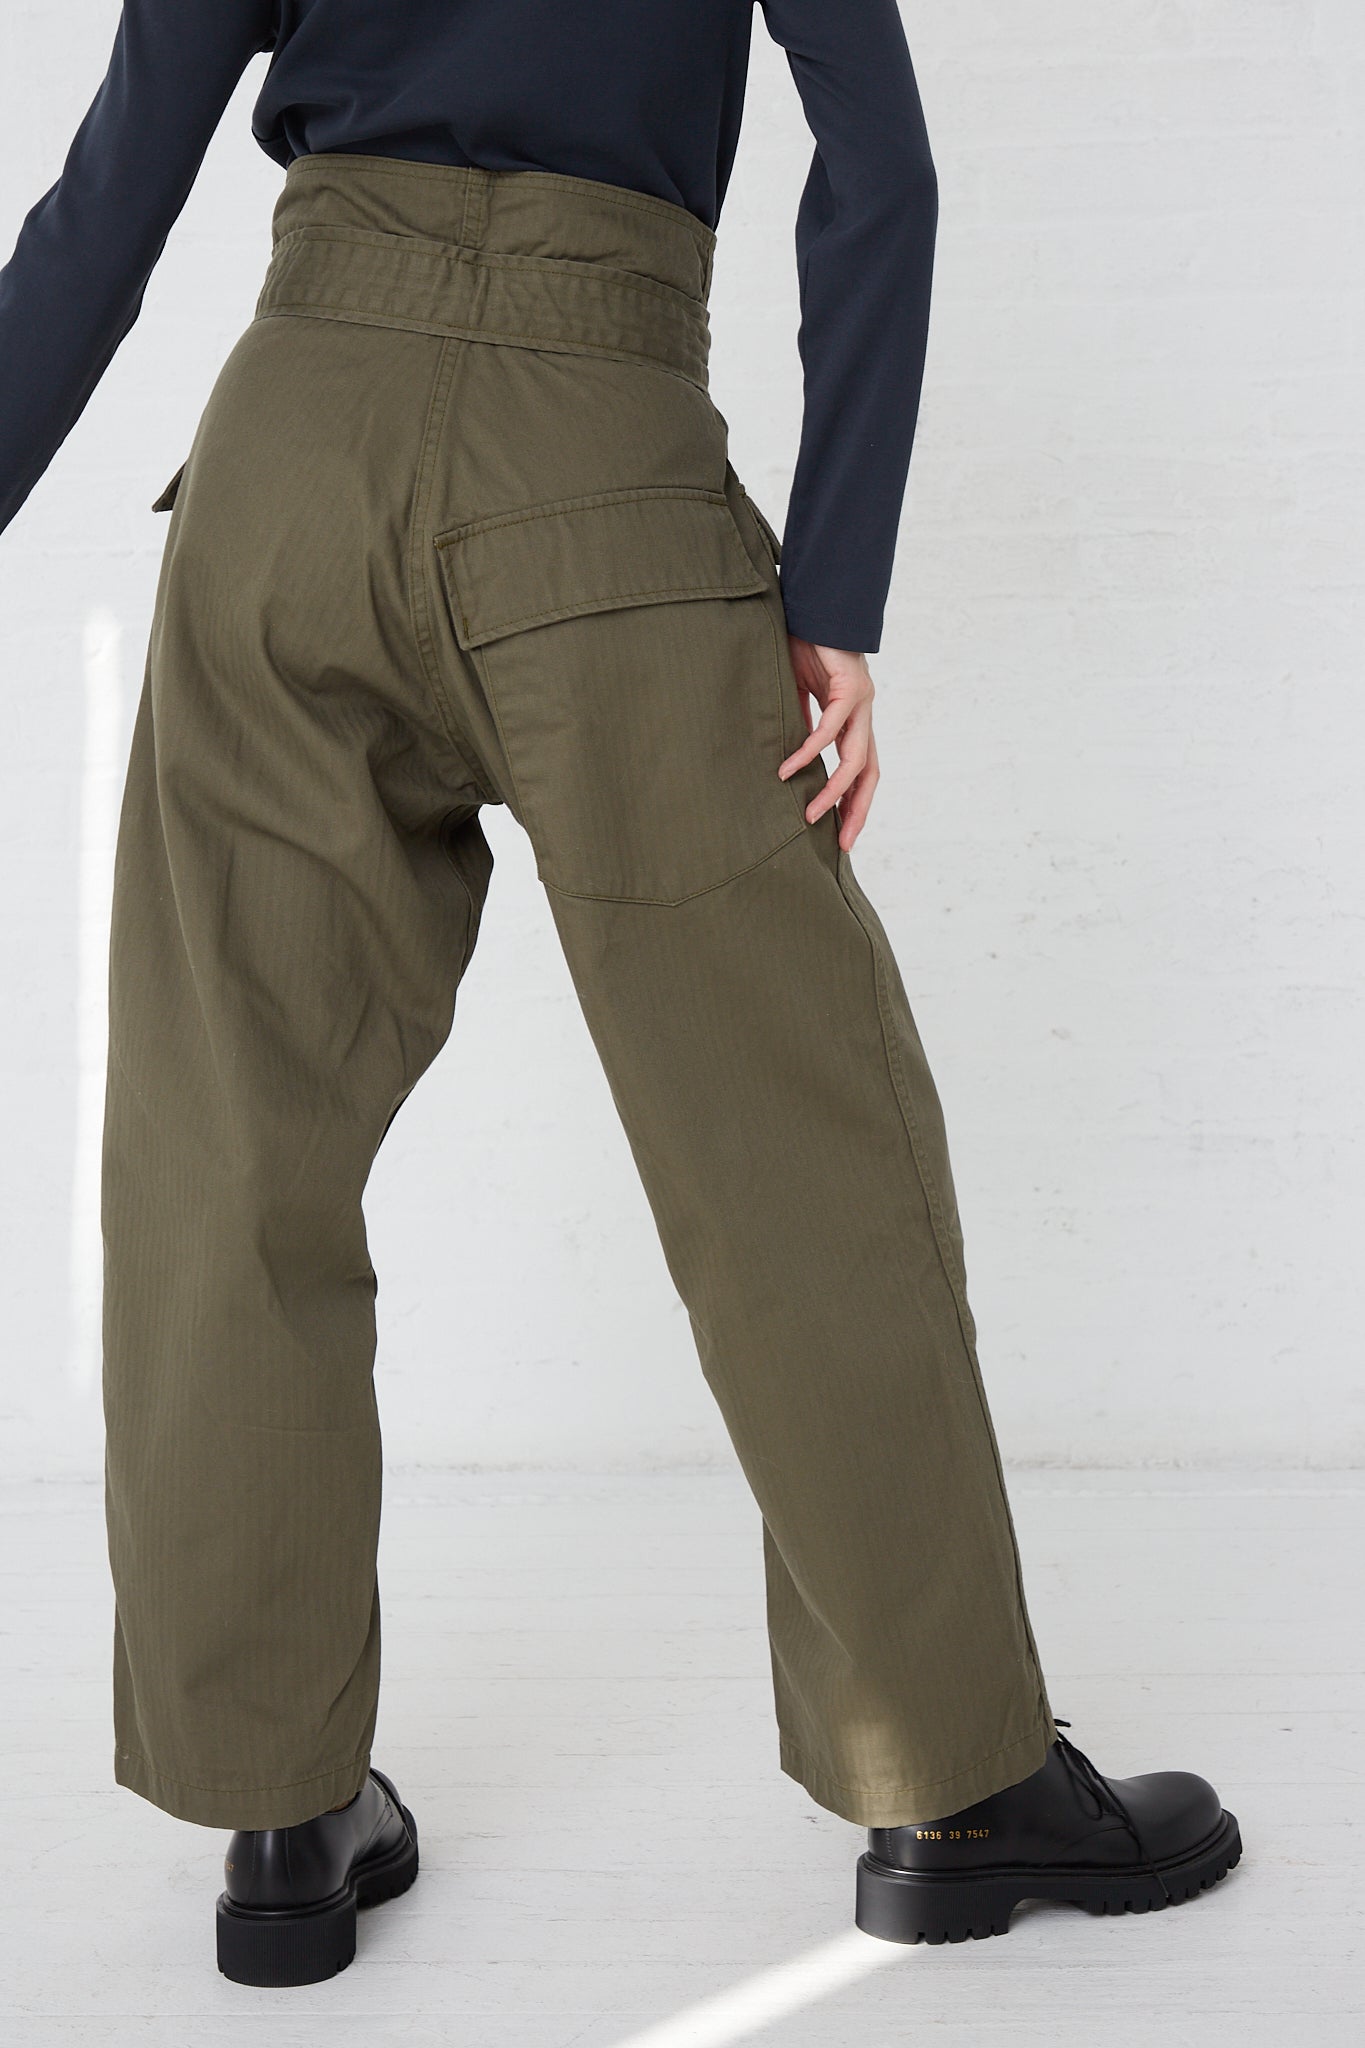 A woman in As Ever's Olive Tie Tanker pants and a black turtle neck. Back view.